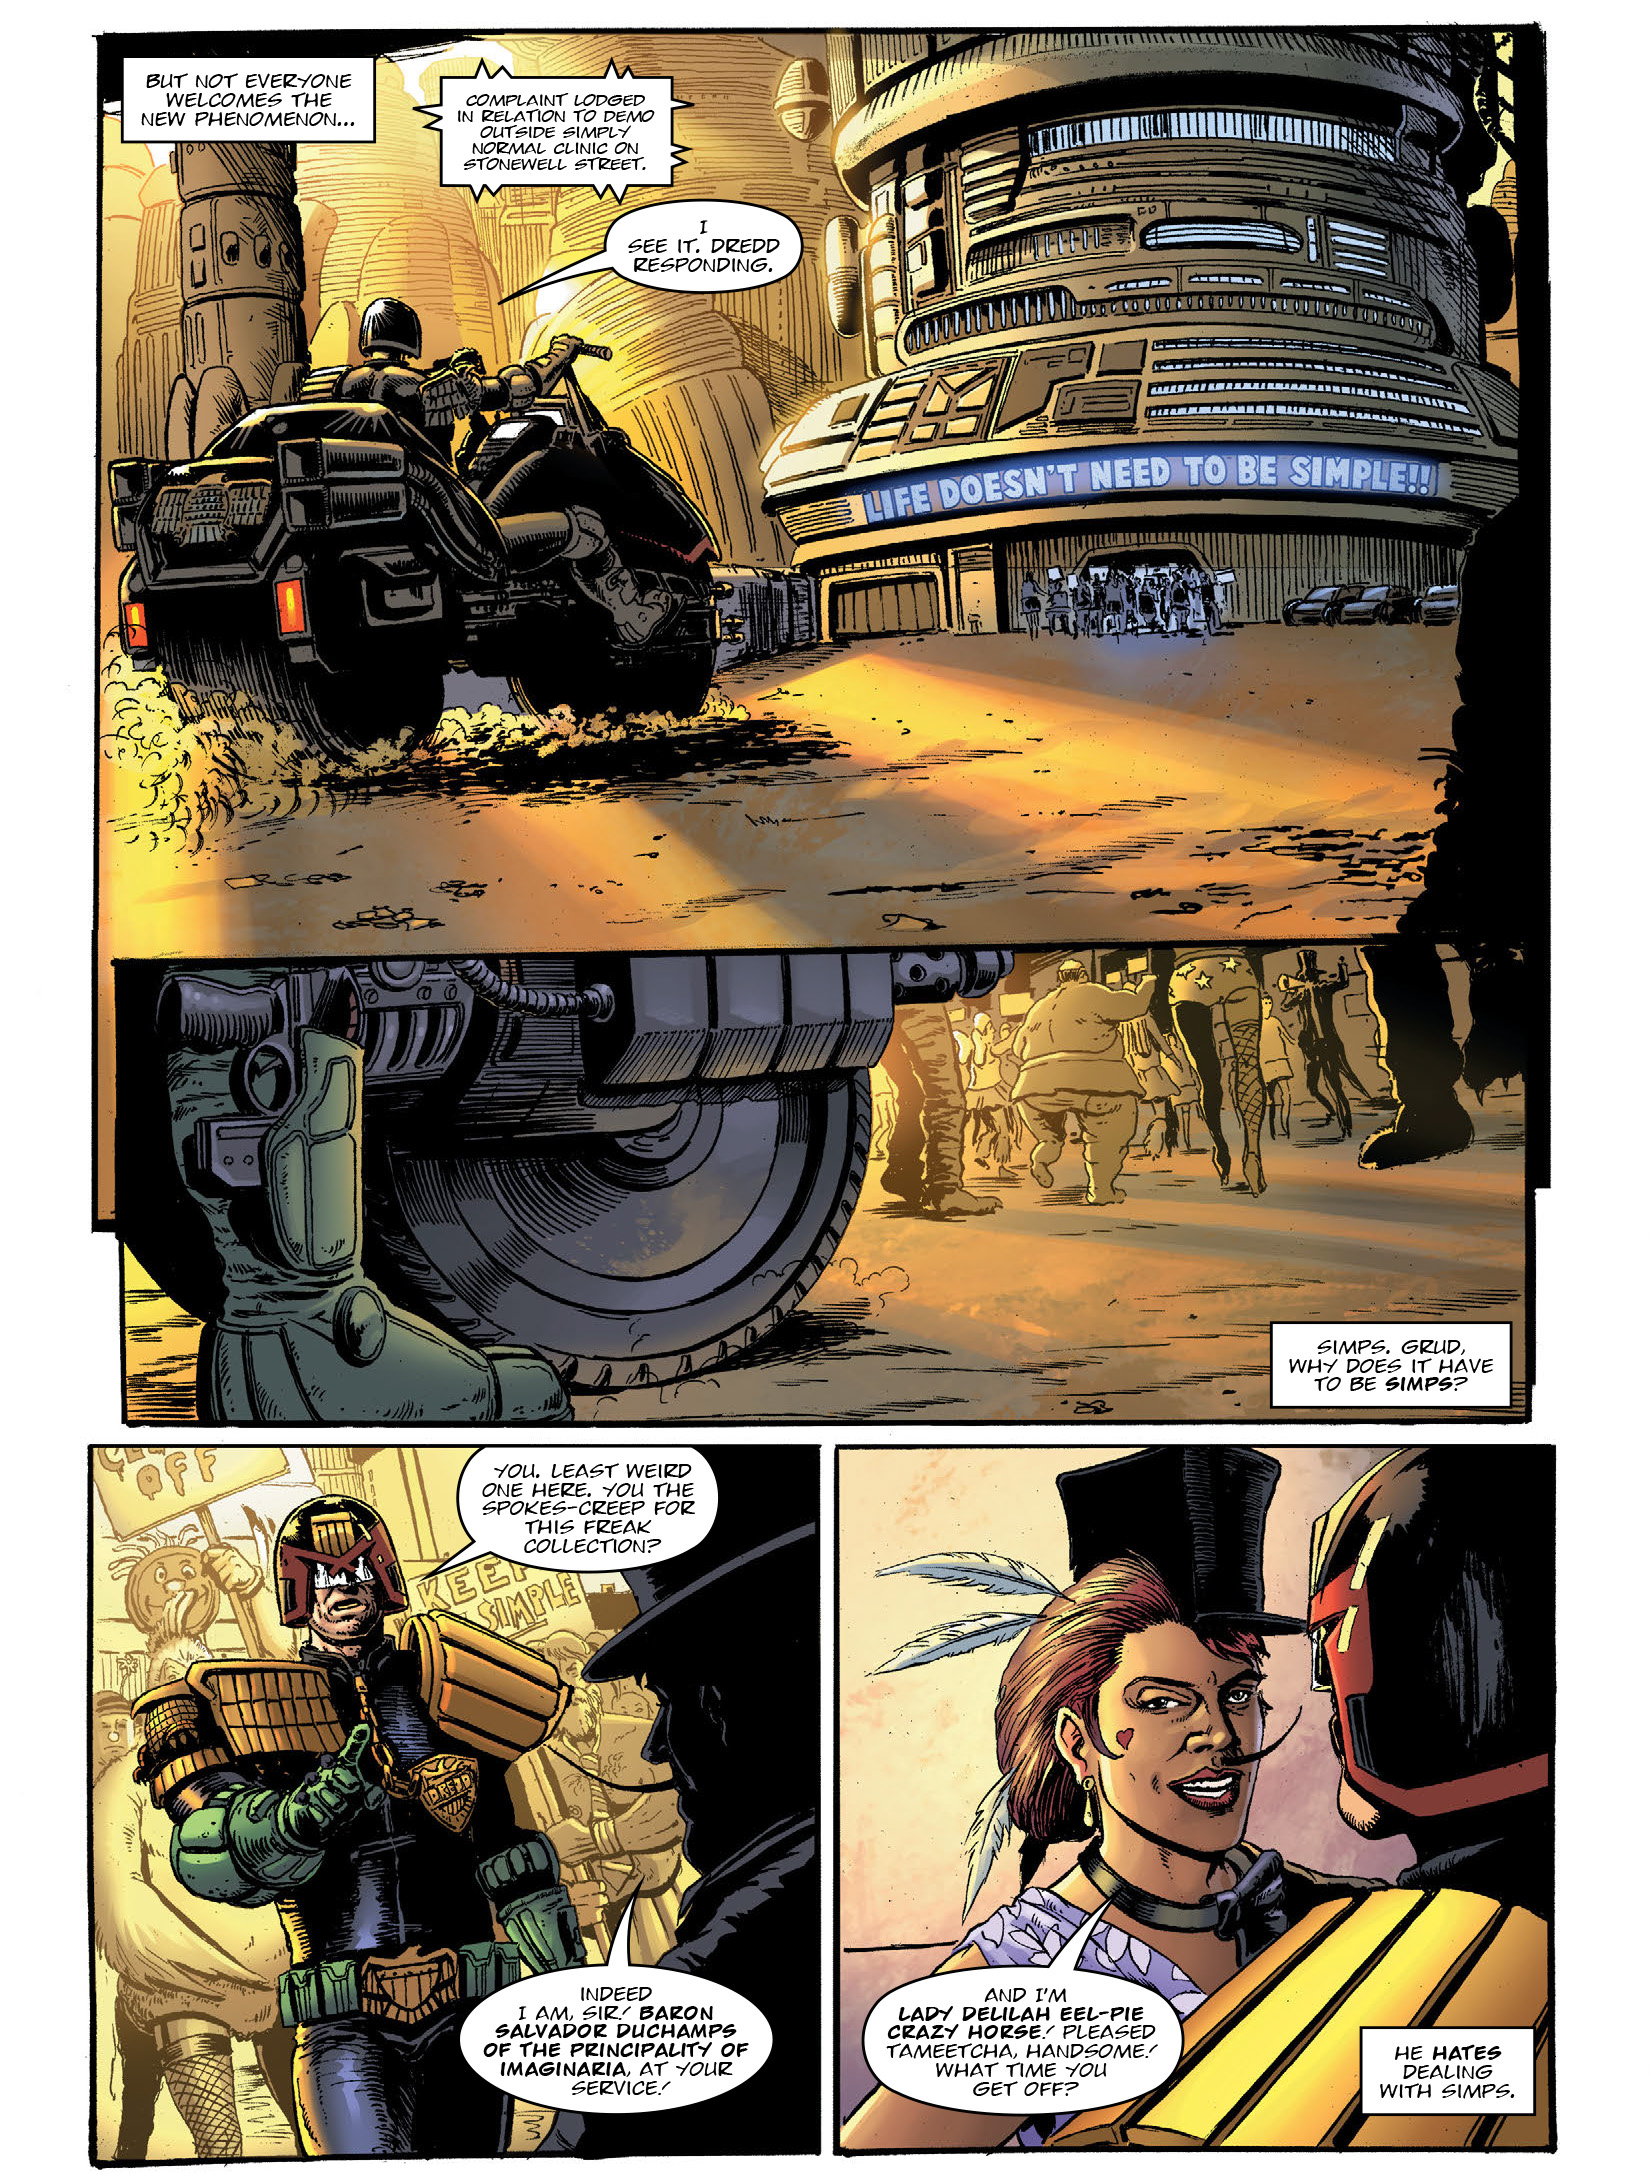 2000 AD: Chapter 2207 - Page 4